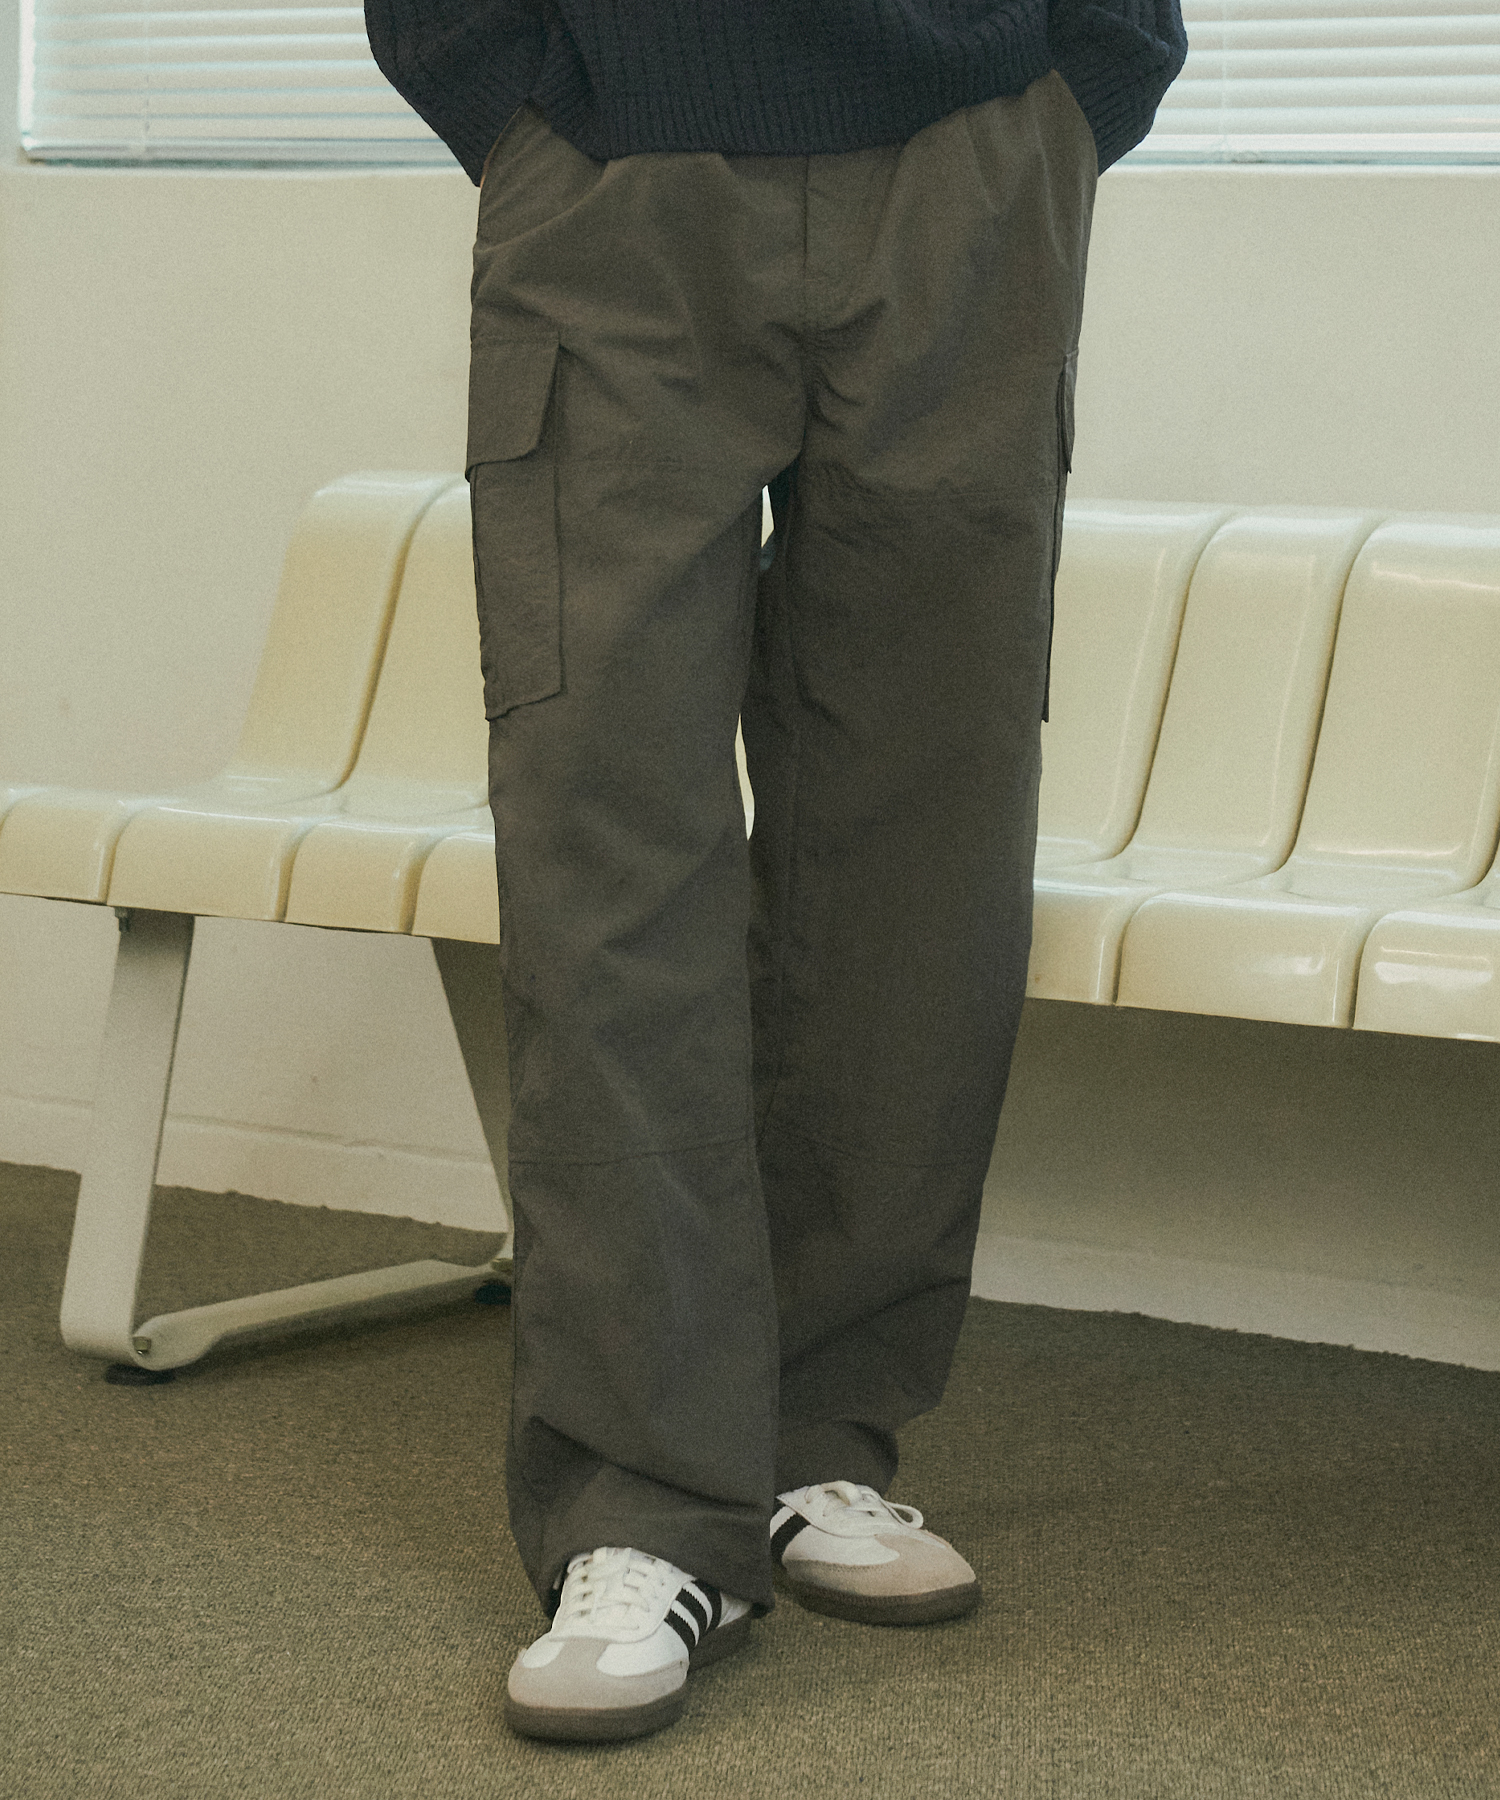 P10005 Utility wide cargo pants_Charcoal